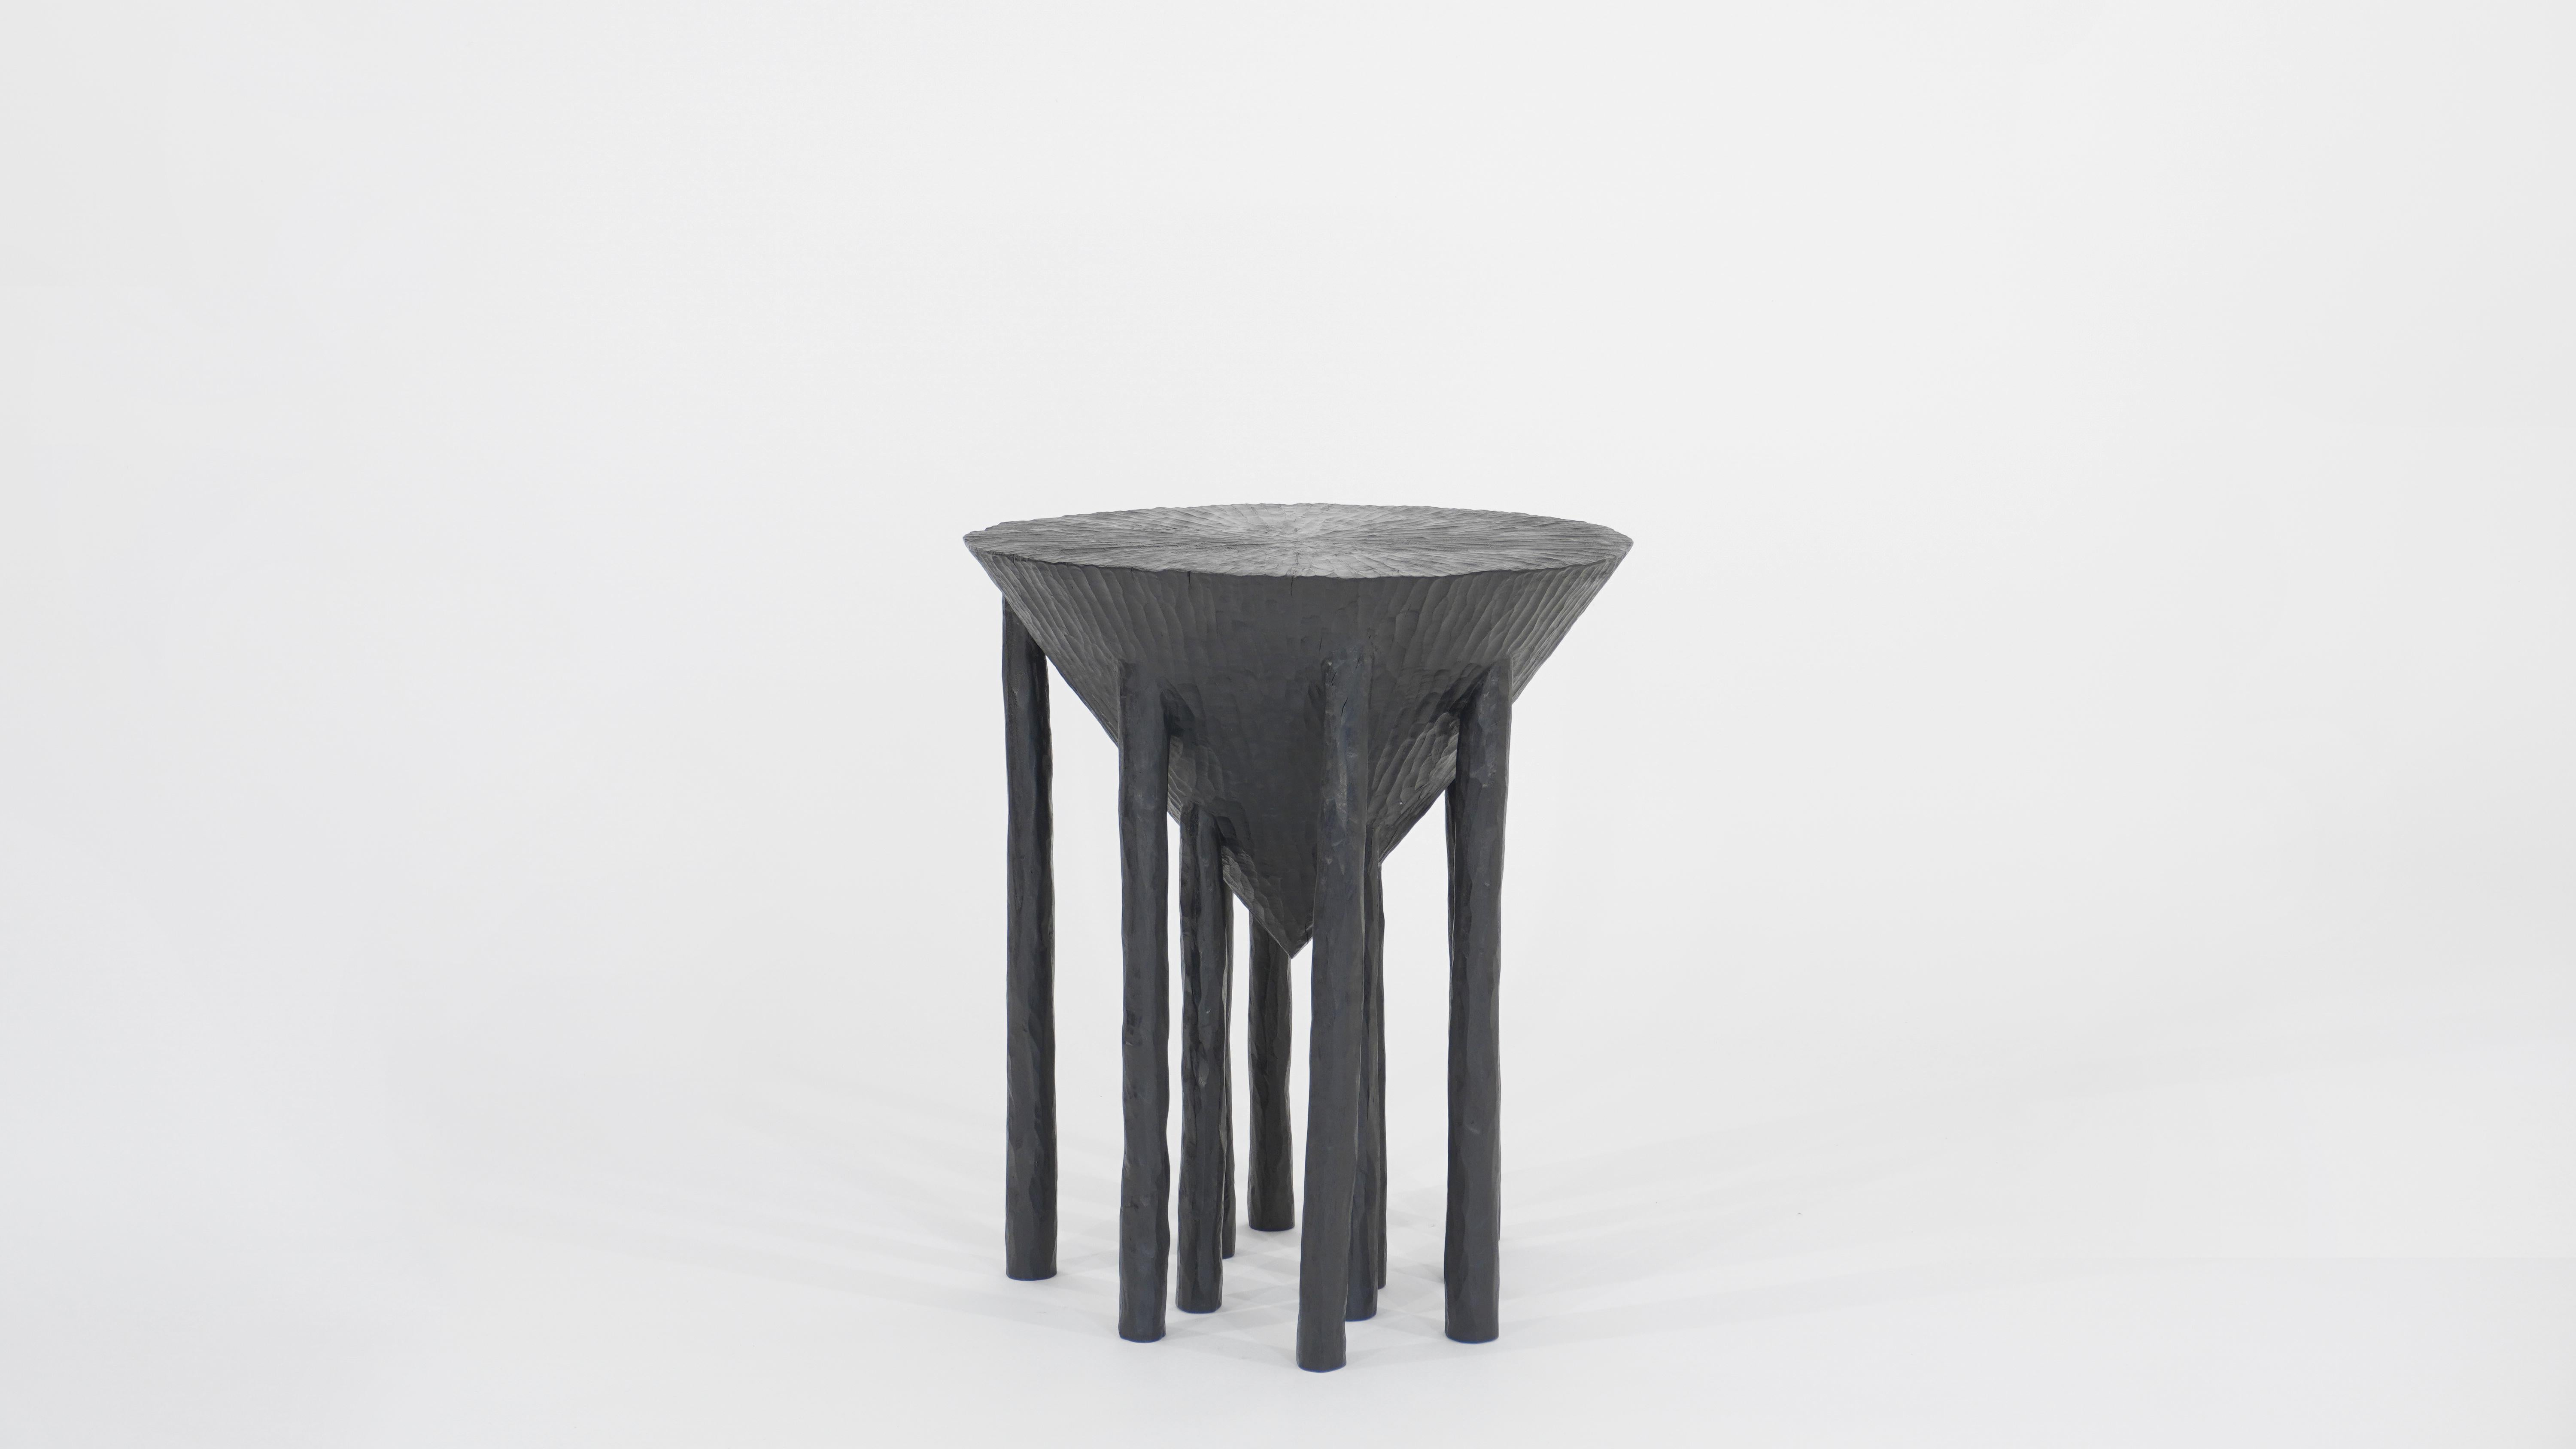 Small Untitled Side Table by Henry D'ath
Dimensions: D 50 x W 50 x H 55 cm
Materials: Wood.
Available finishes: Black ink. 

Carved by hand from a single wooden log over many months, this series of tables is shaped with a consideration of what the